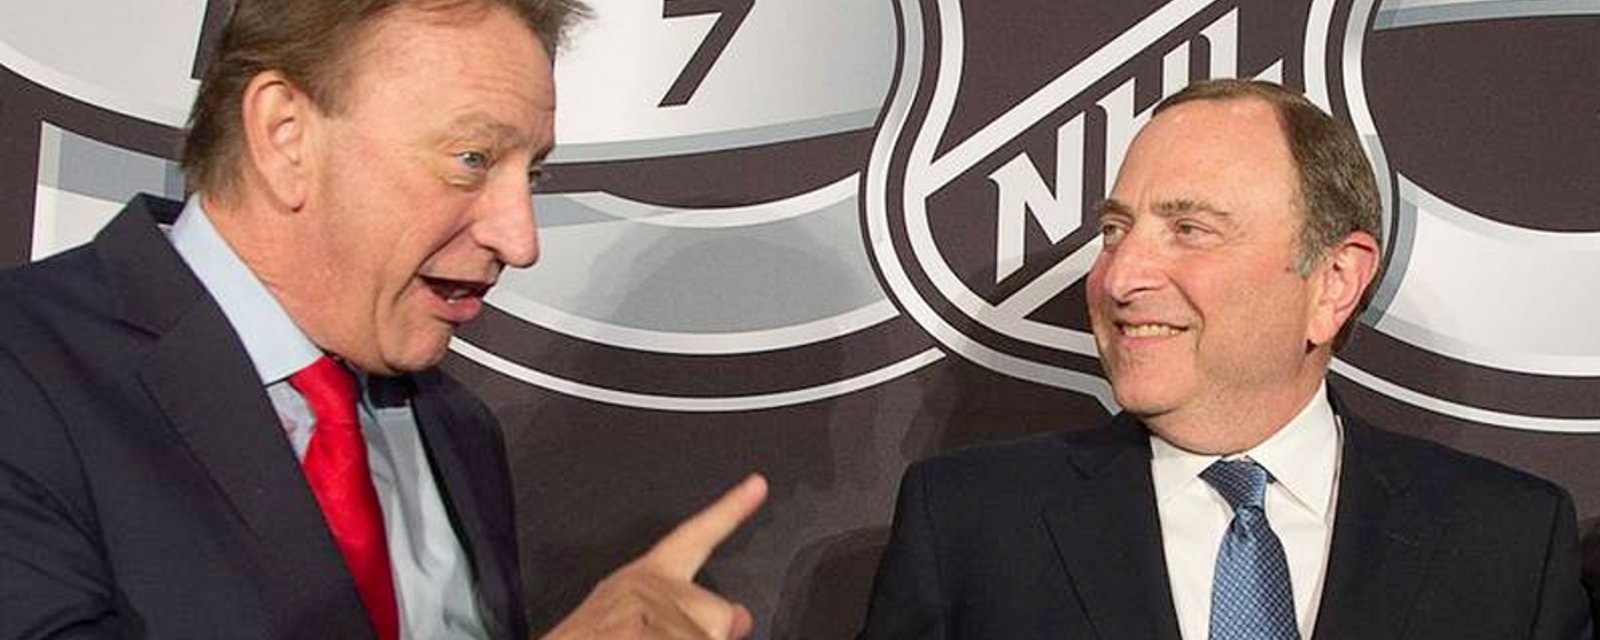 NHL owners to Bettman: Do something about Melnyk!